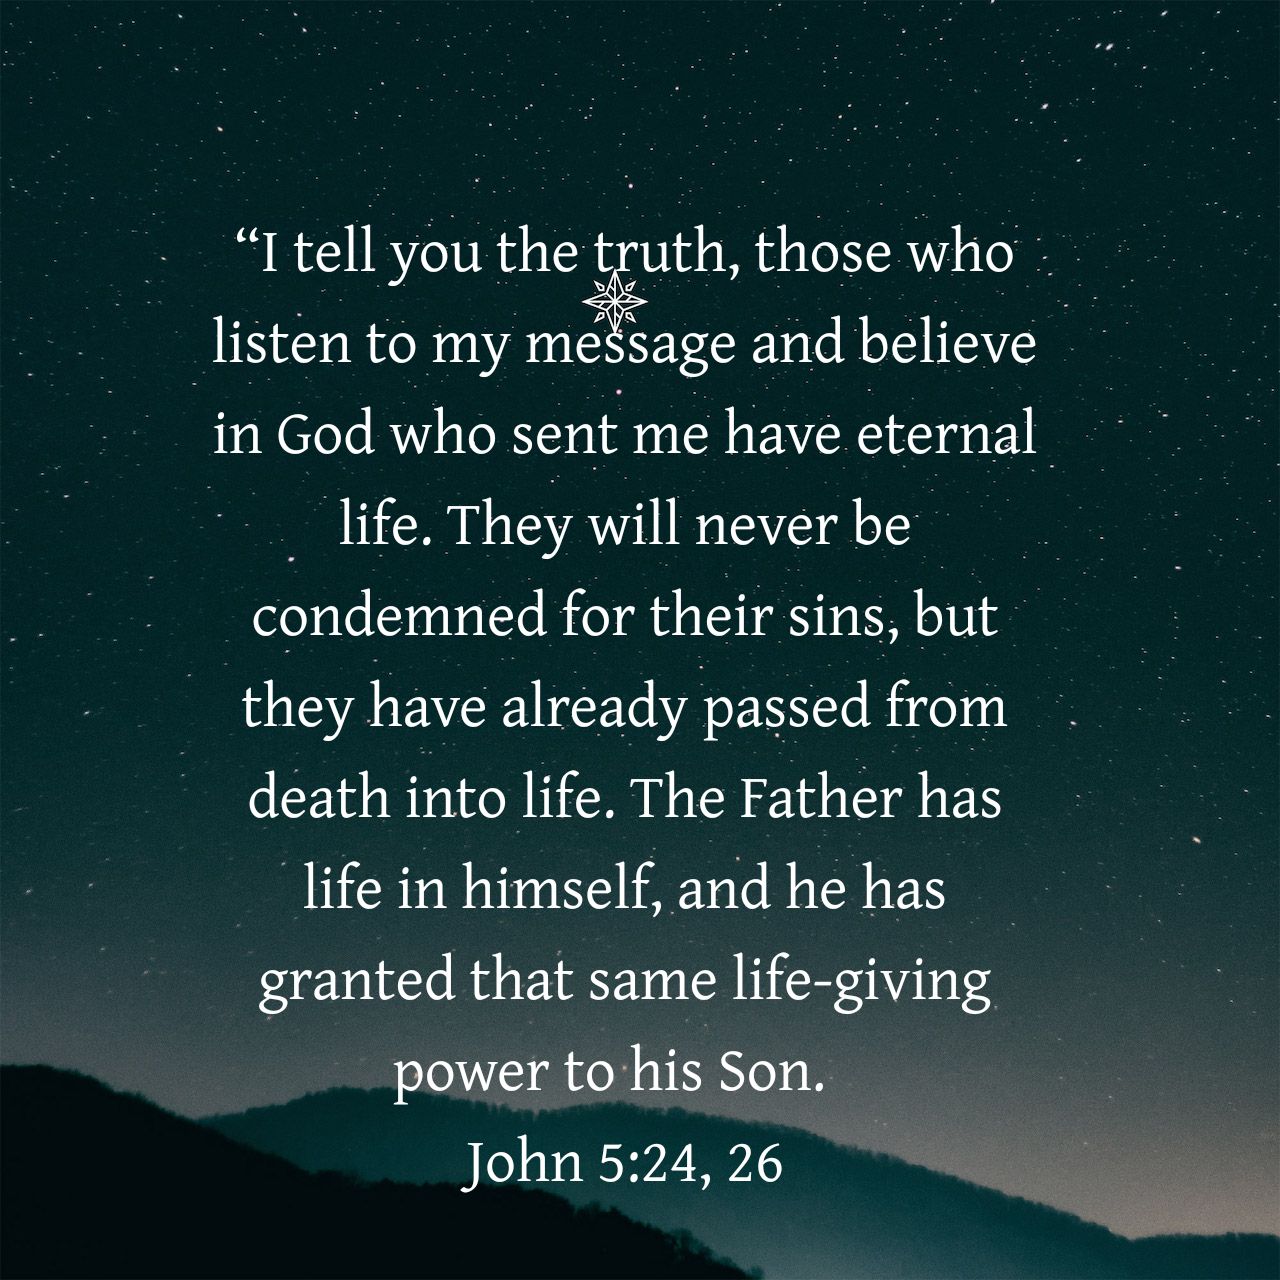 "Itell you the truth, those who listen to my message and believe in God who sent me have eternal life. will never be condemned for their sins, but have already passed from death into life. The Father has life in himself, and he has granted that same life-giving to his Son: John 5.24,26 They they power